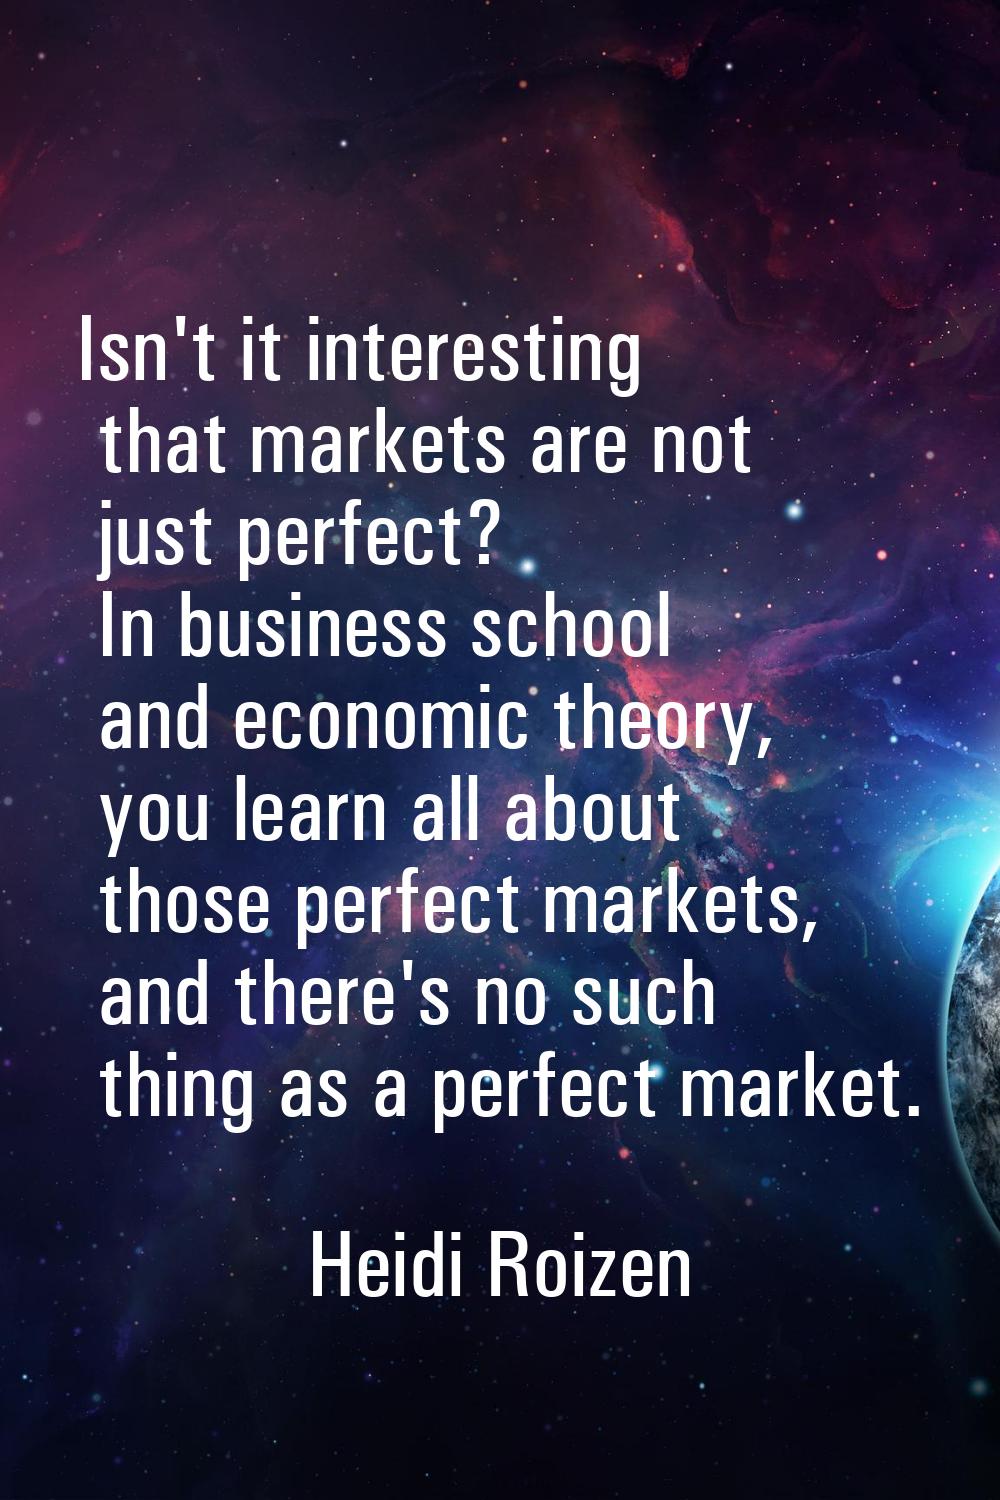 Isn't it interesting that markets are not just perfect? In business school and economic theory, you